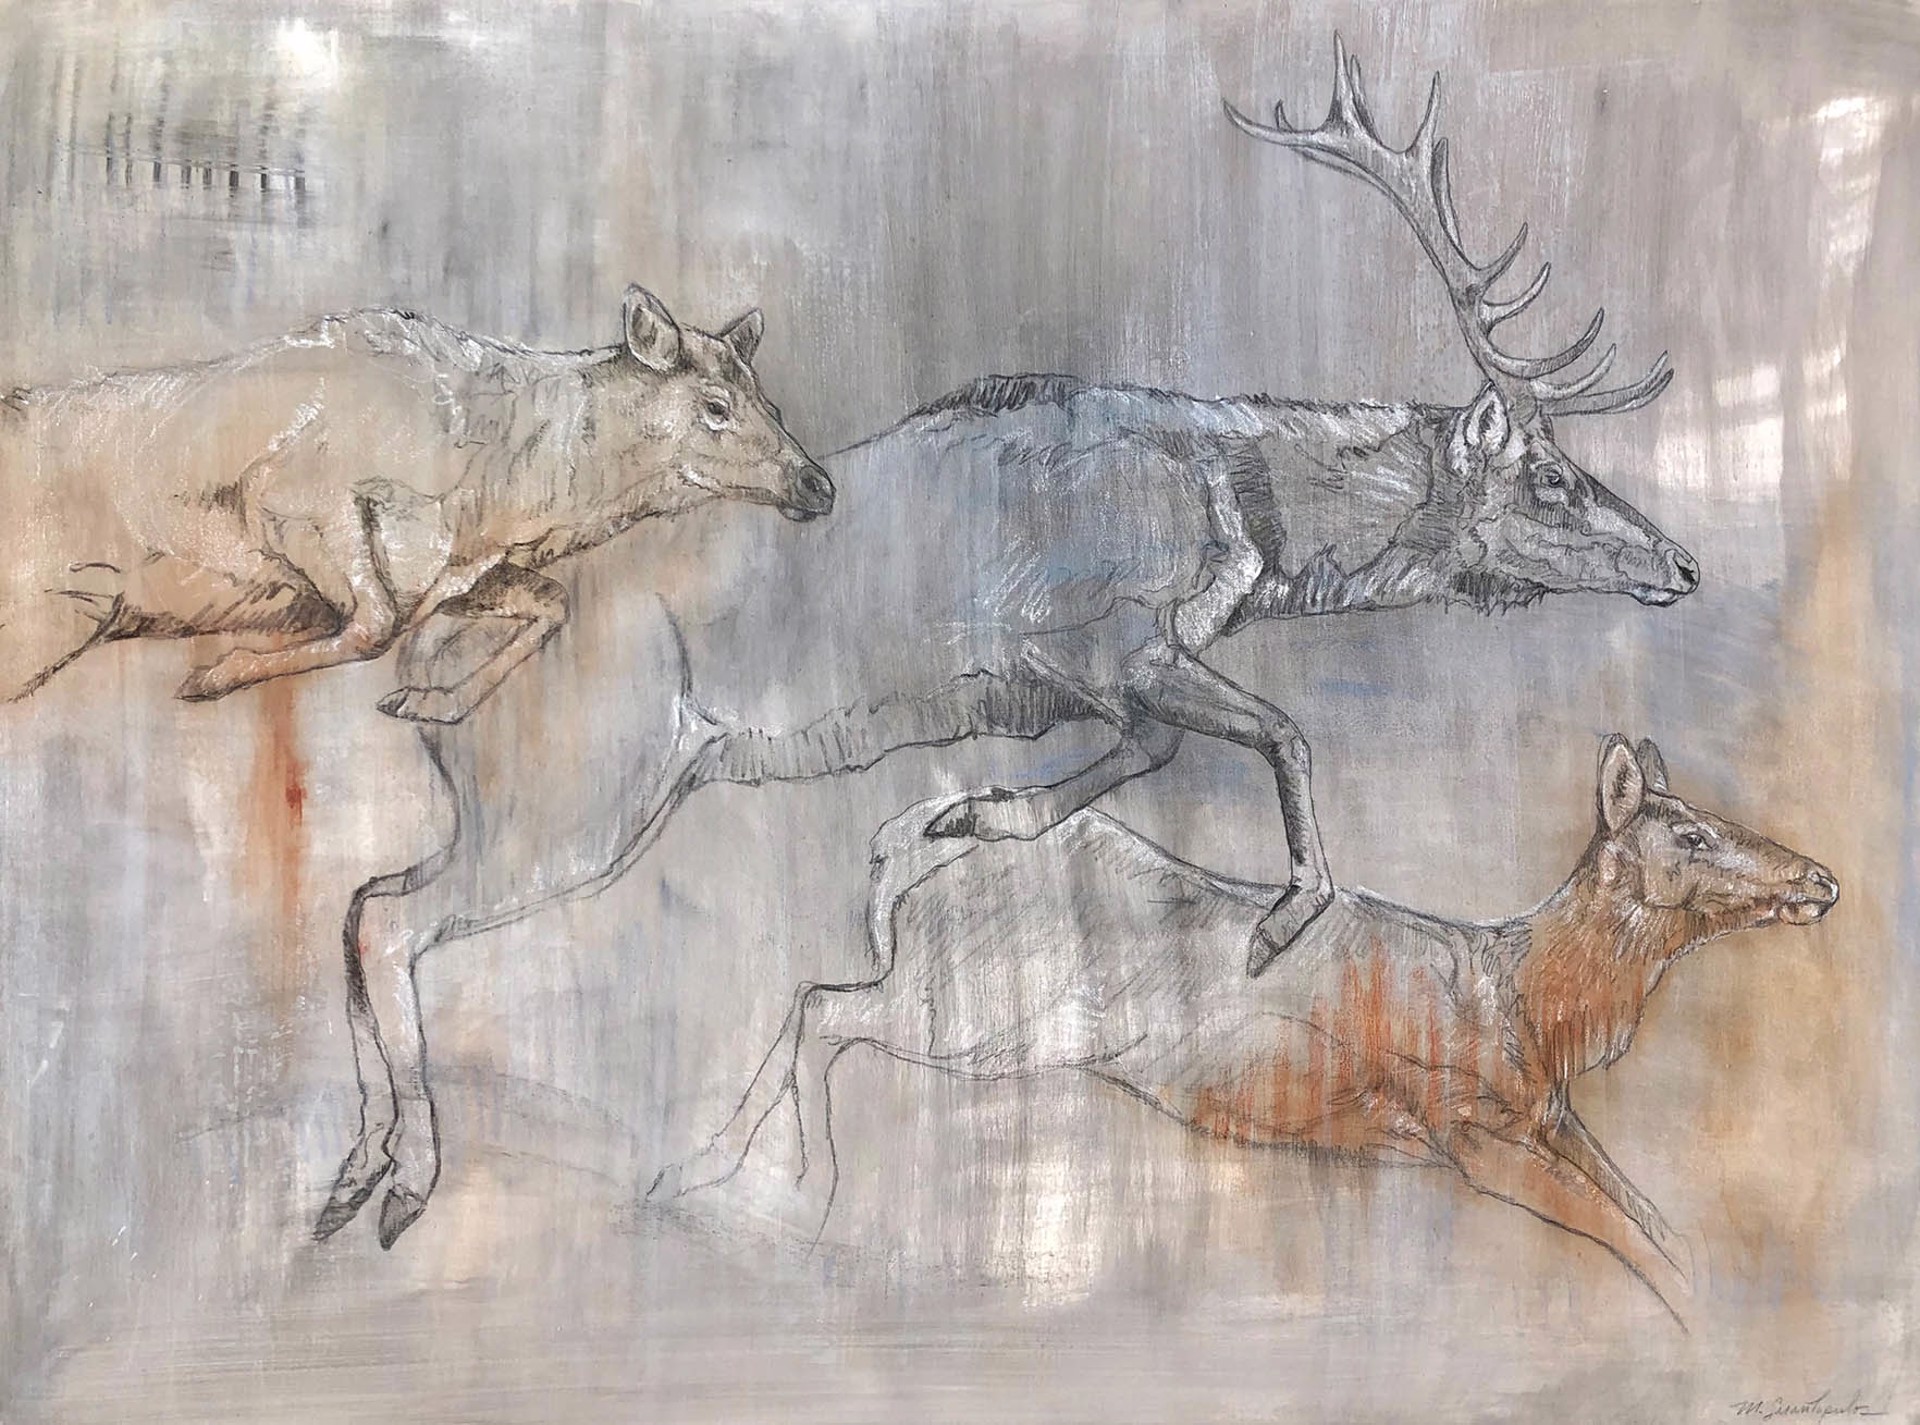 Original Mixed Media Artwork Featuring Running Elk Sketched Onto Abstract Grey Background